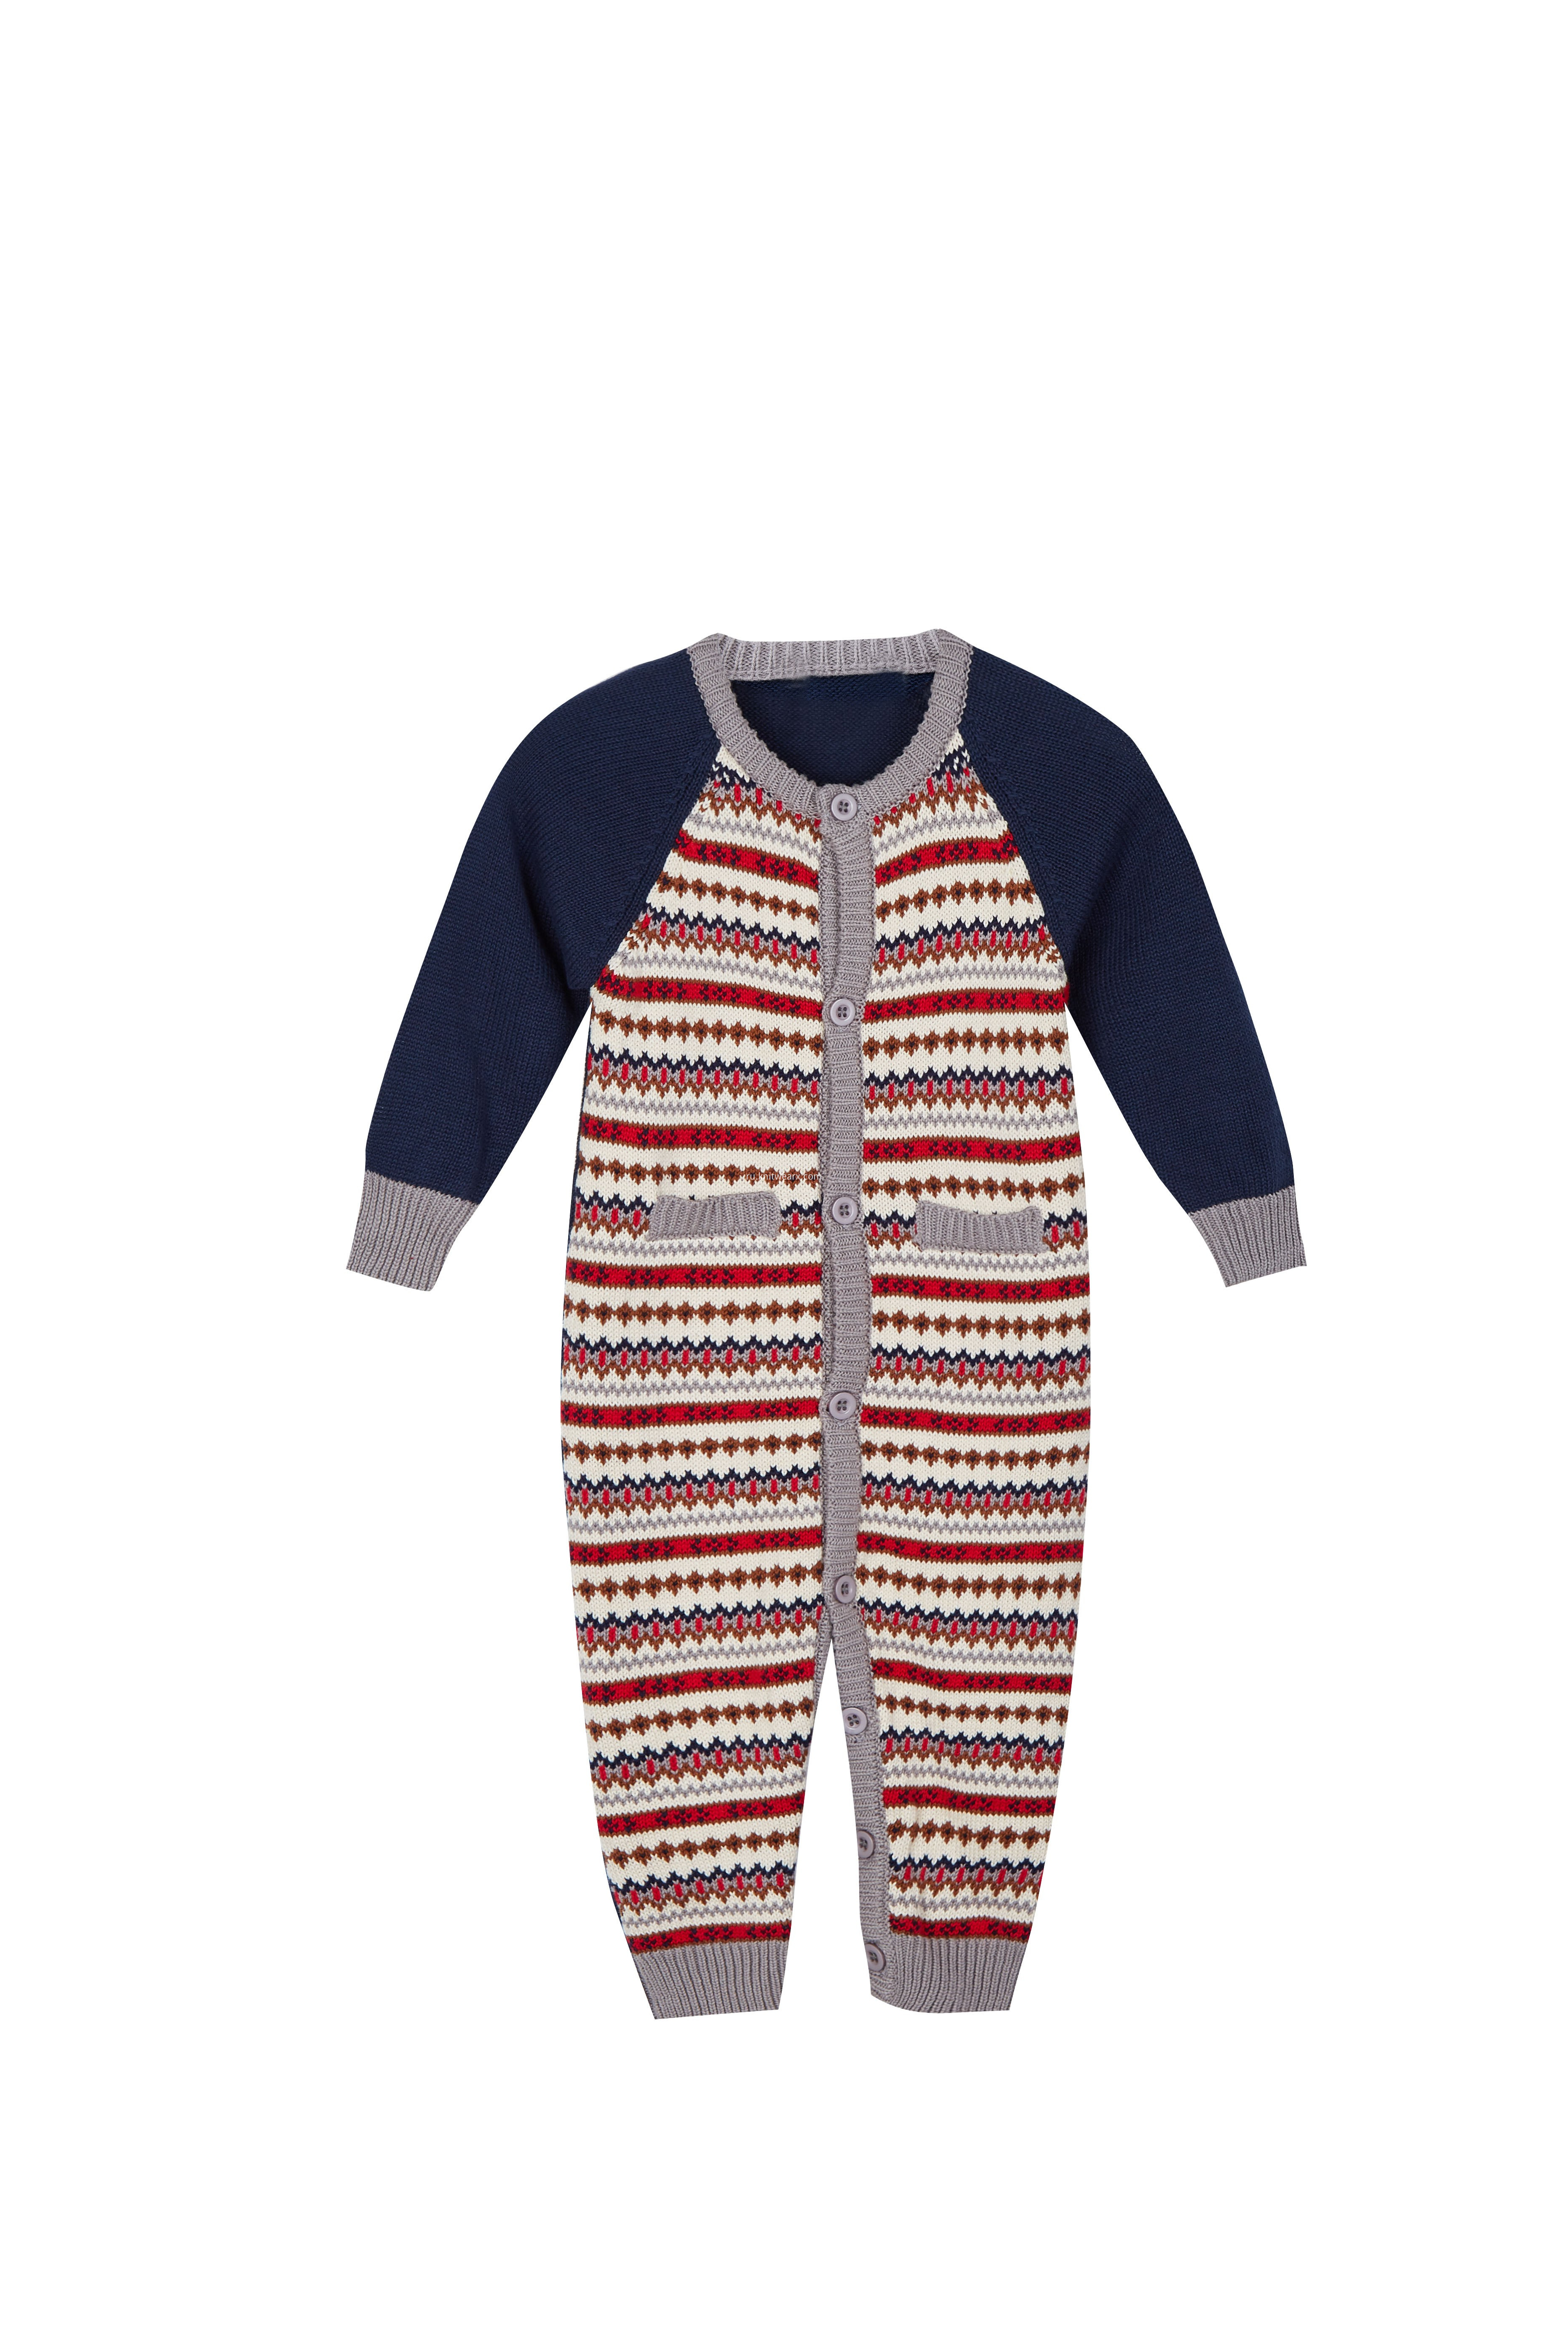 Boy's Girl's Knitted Jacquard Buttoned Baby Romper